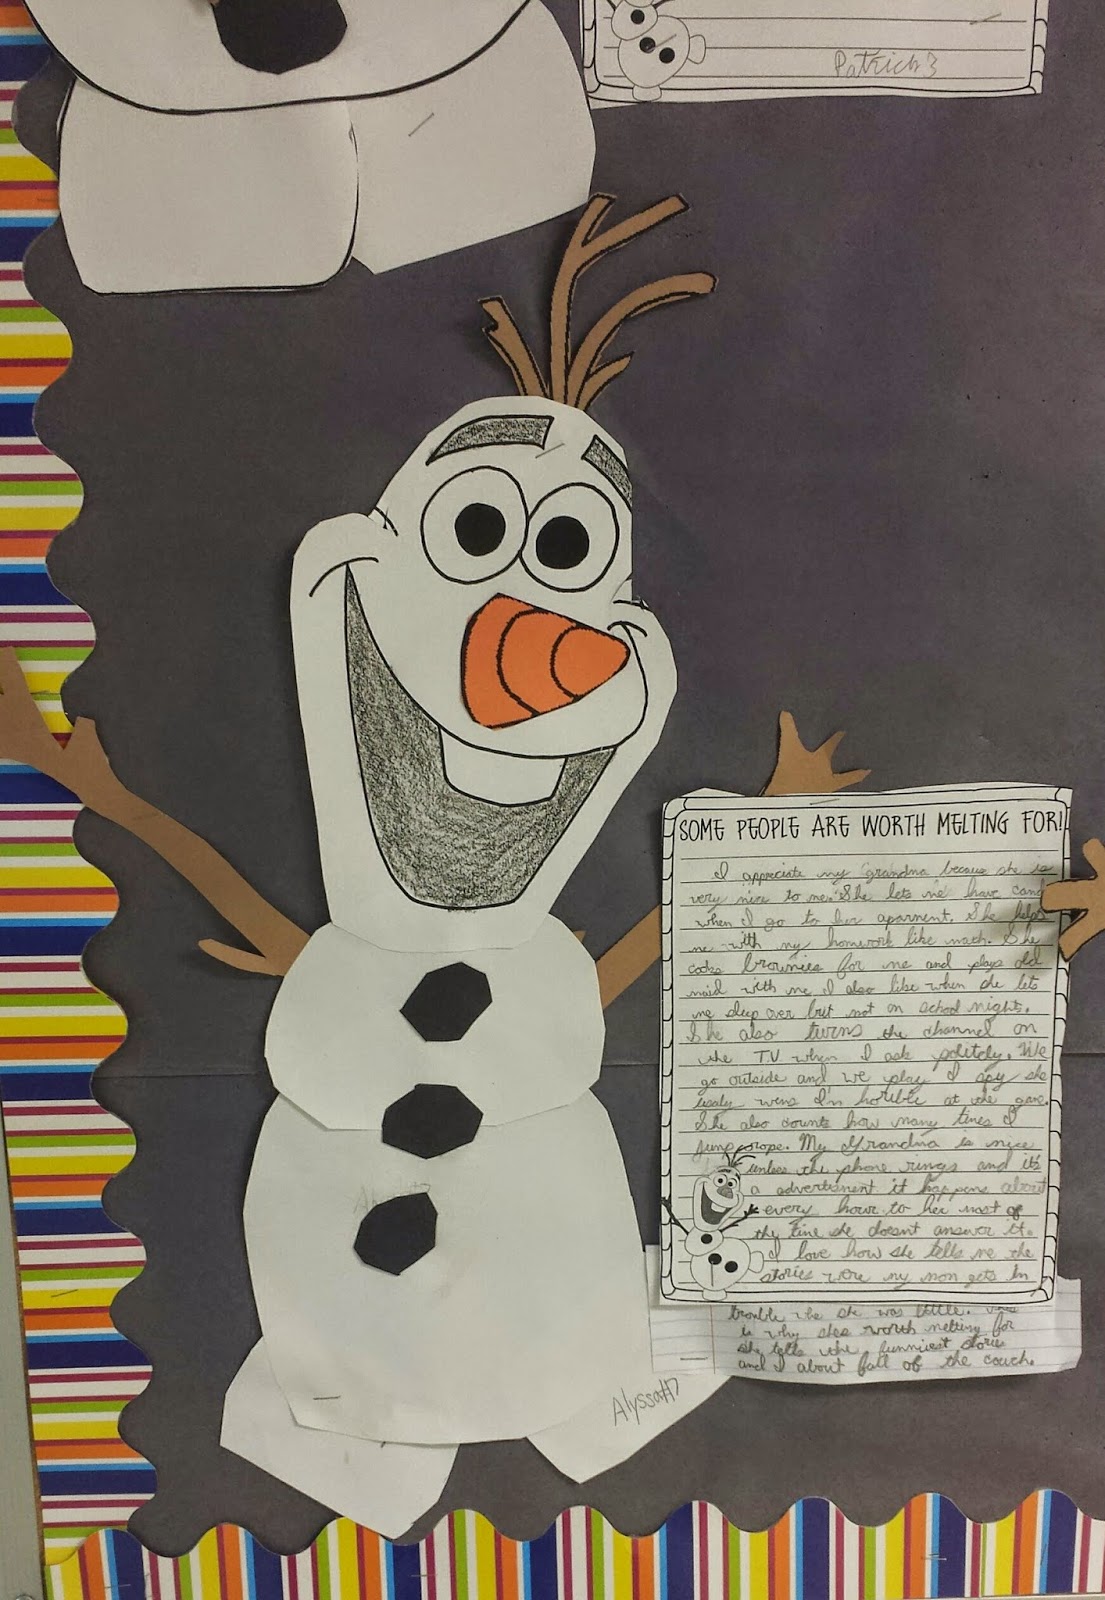 http://www.teacherspayteachers.com/Product/Winter-Writing-FROZEN-Olaf-Themed-Some-People-Are-Worth-Melting-For-1610473